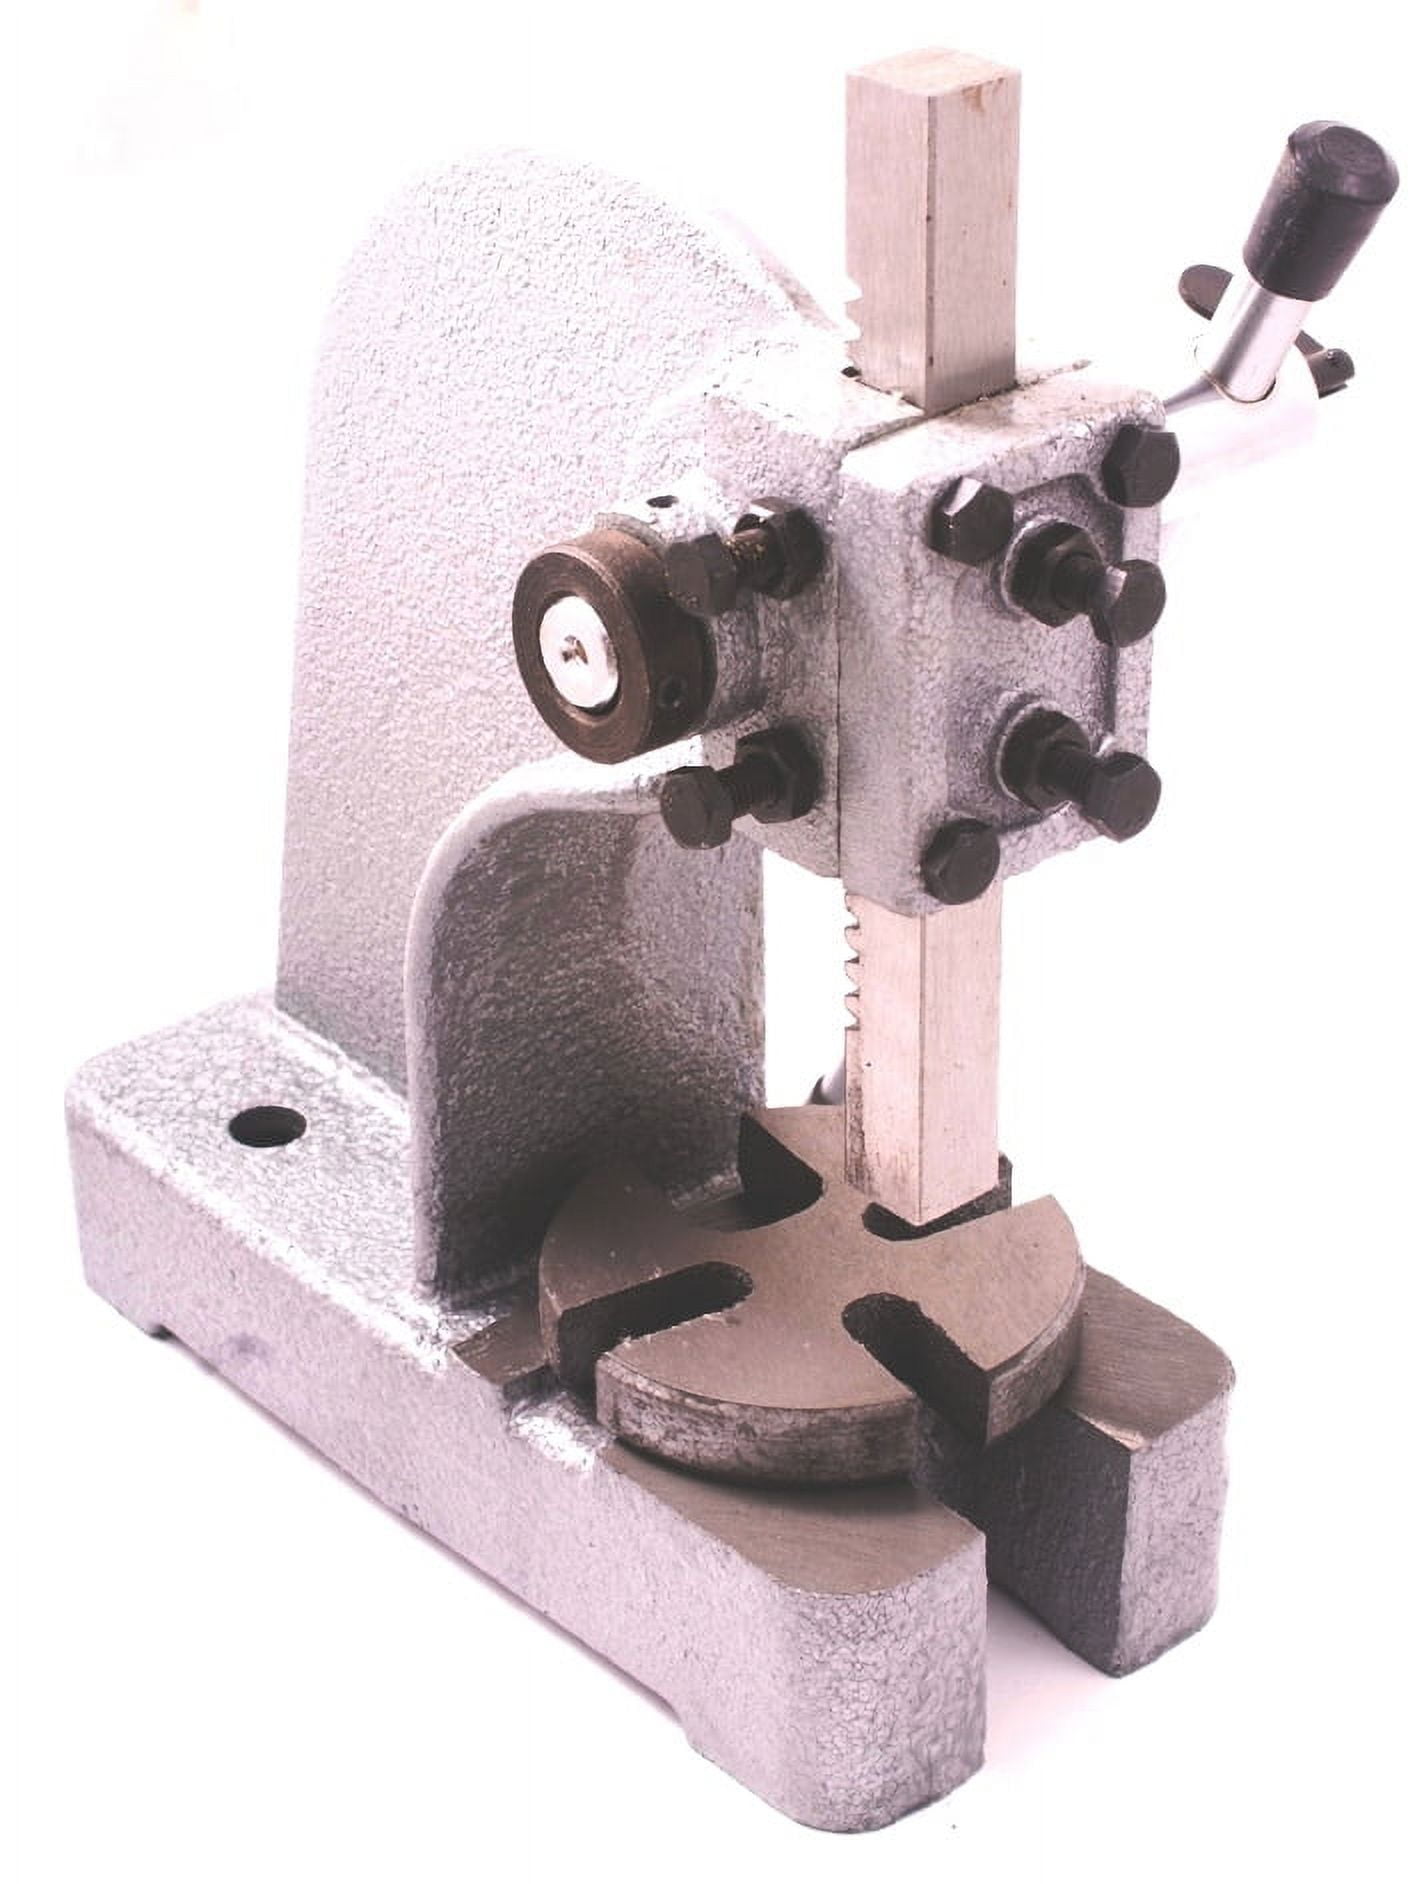 Dayton Arbor Press: 2 ton Force in Tons, 11 in Swing , 7-1/4 x 6 in, 3/32  to 2-13/64